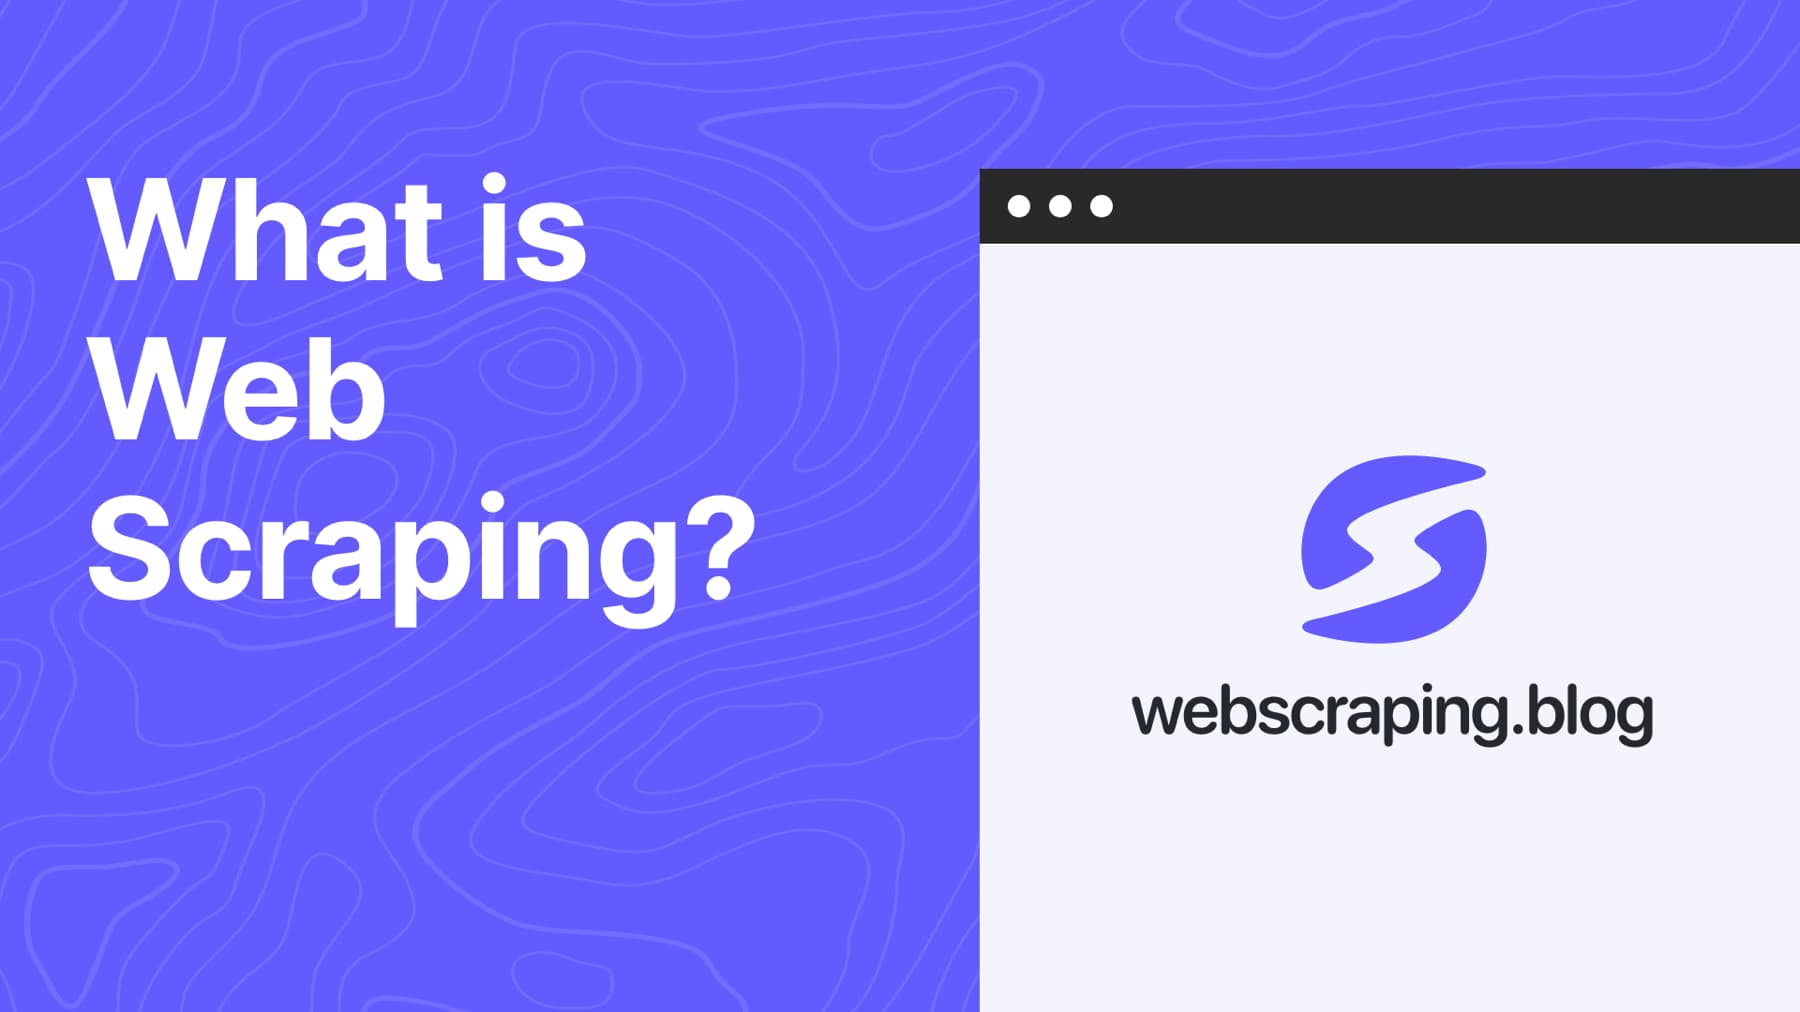 What is web scraping and what is it used for?